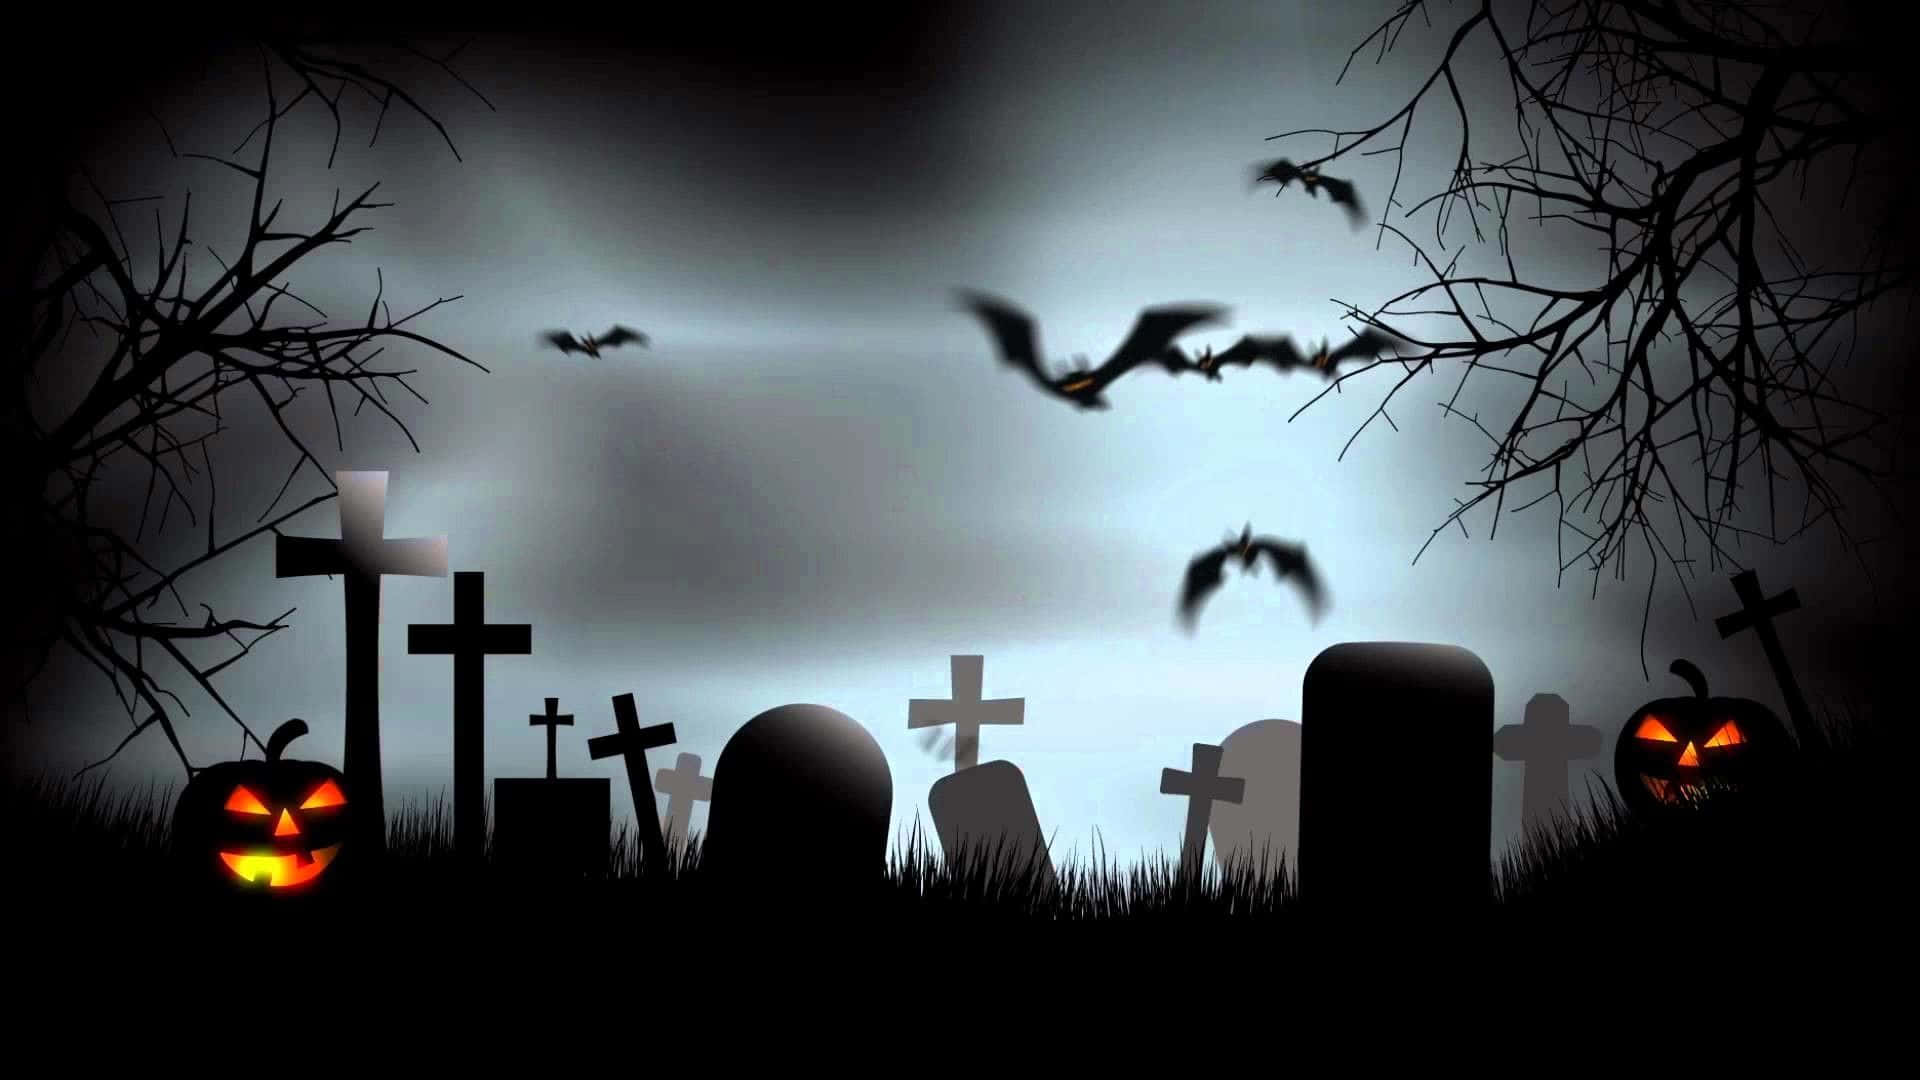 "Spooky and mysterious: An eerie graveyard on Halloween night" Wallpaper